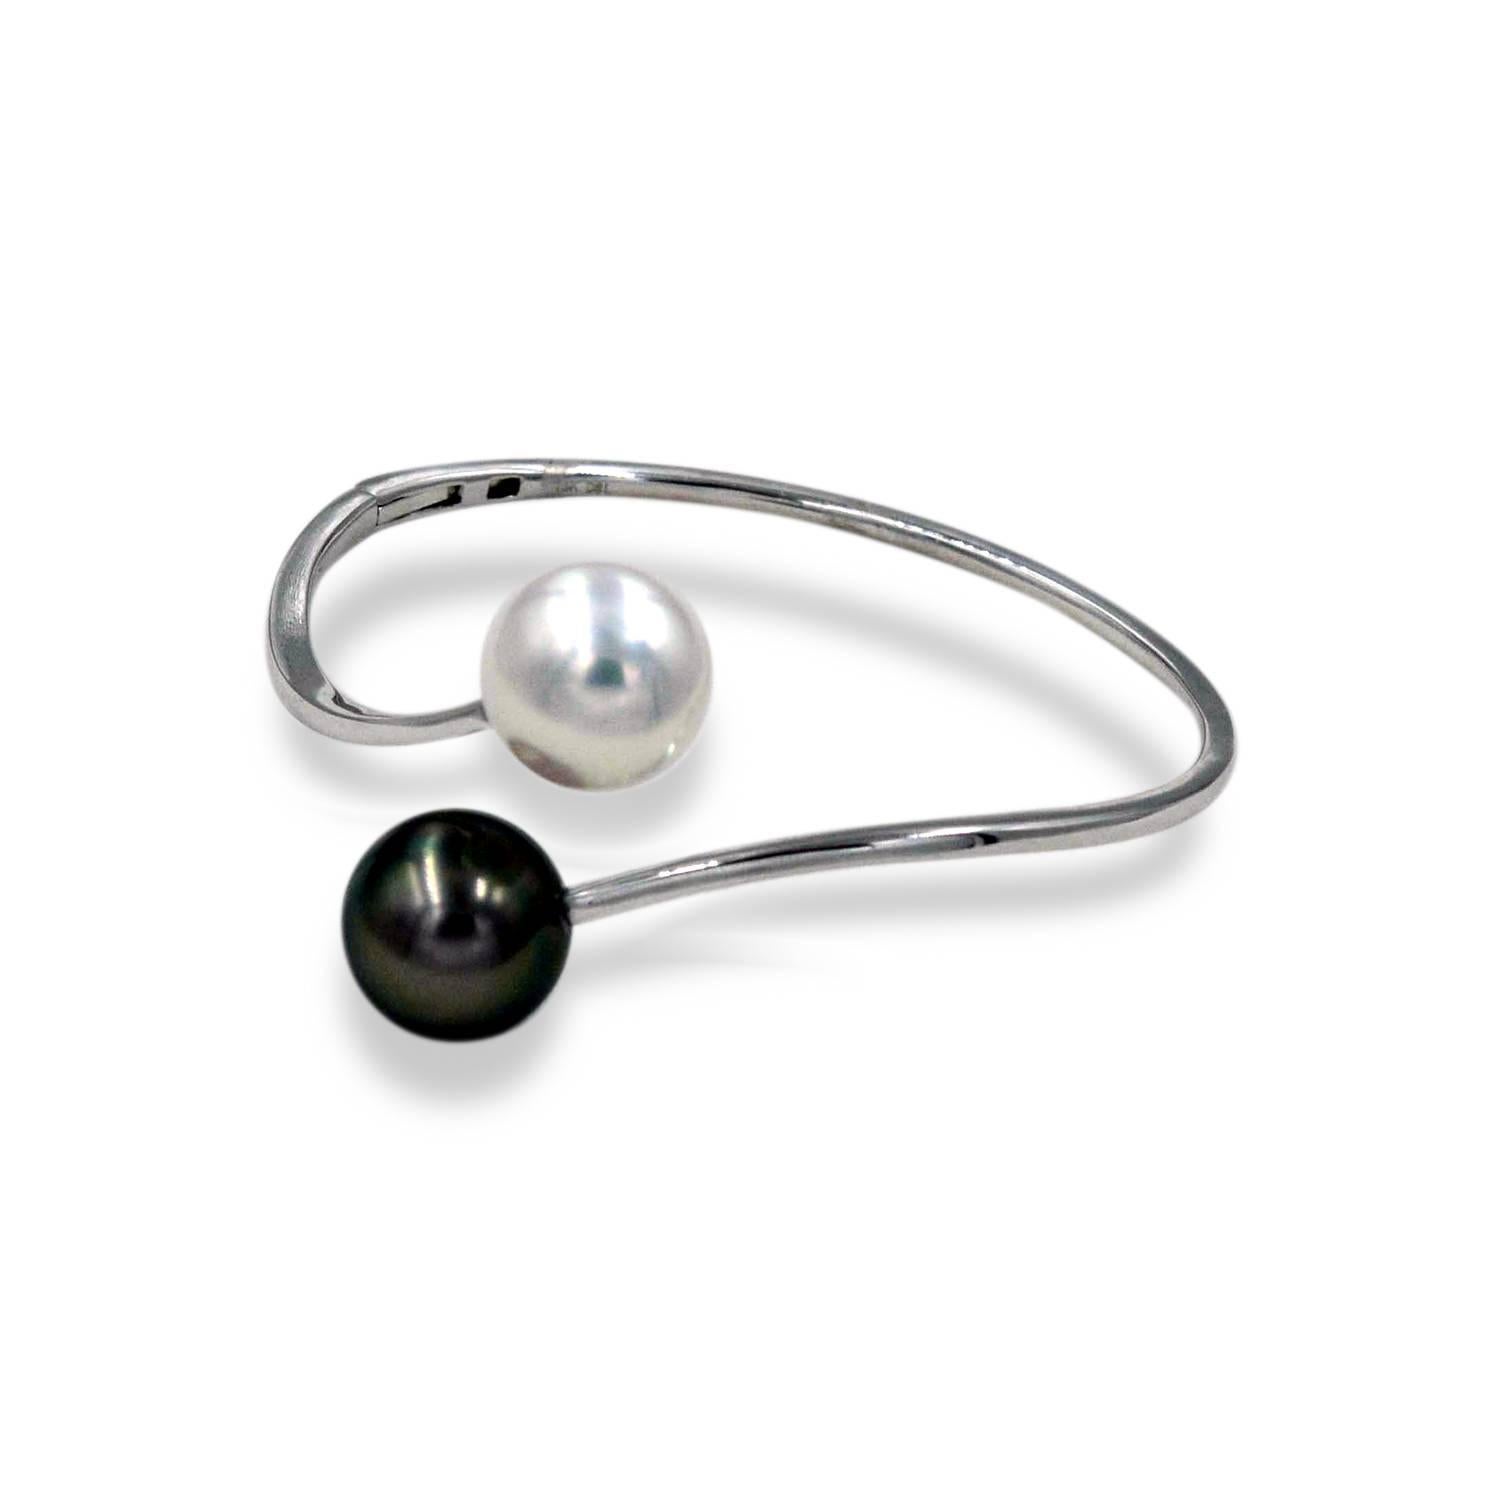 Gold: 18K White Gold
South Sea Pearl And Tahitian Pearl : 12-13 mm
metal: 9.0 g.